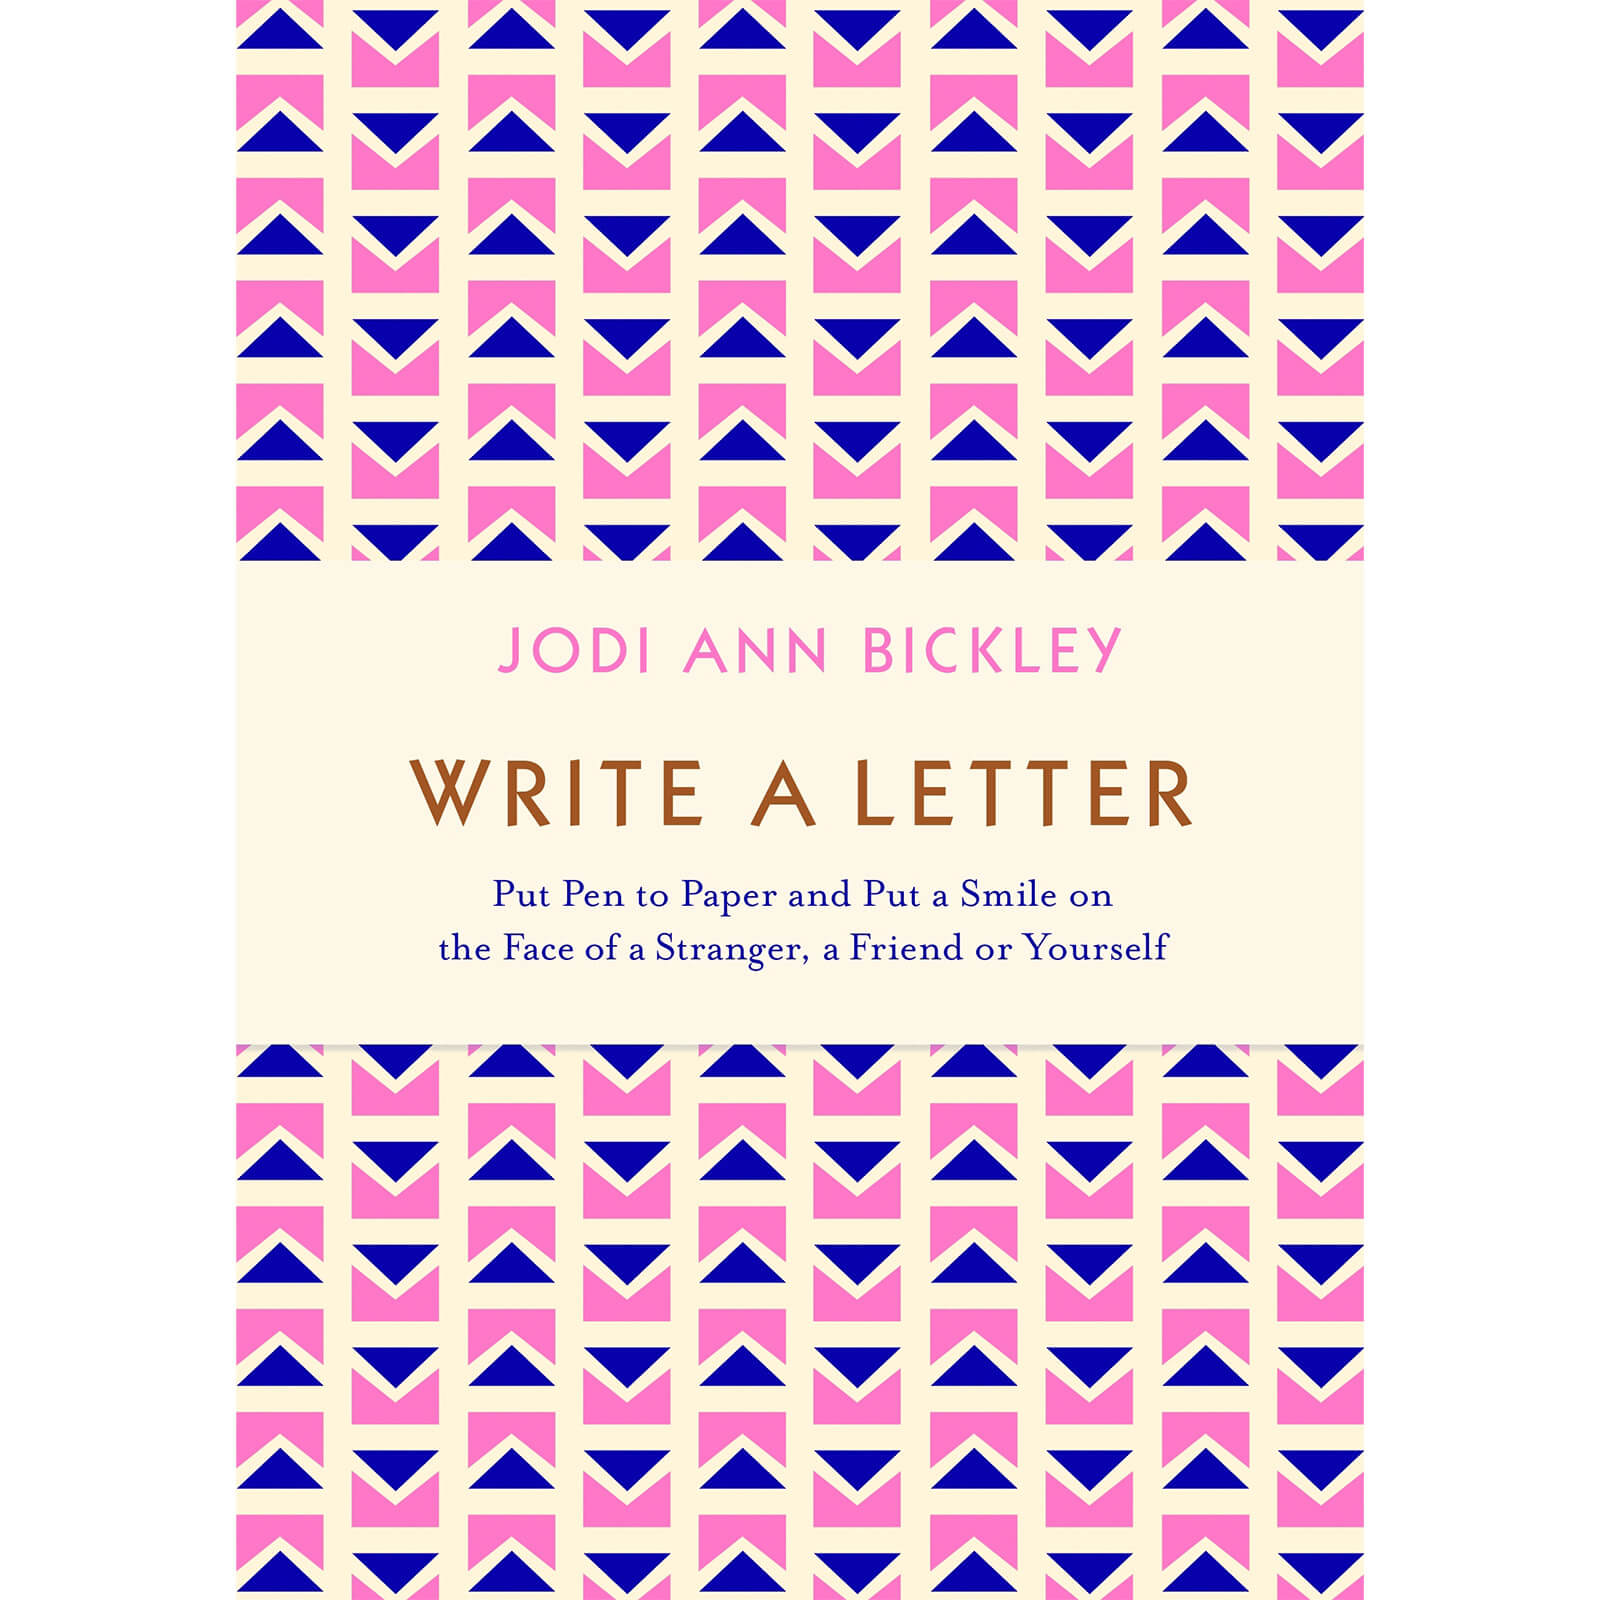 Write a Letter by Jodie Bickley (Paperback)